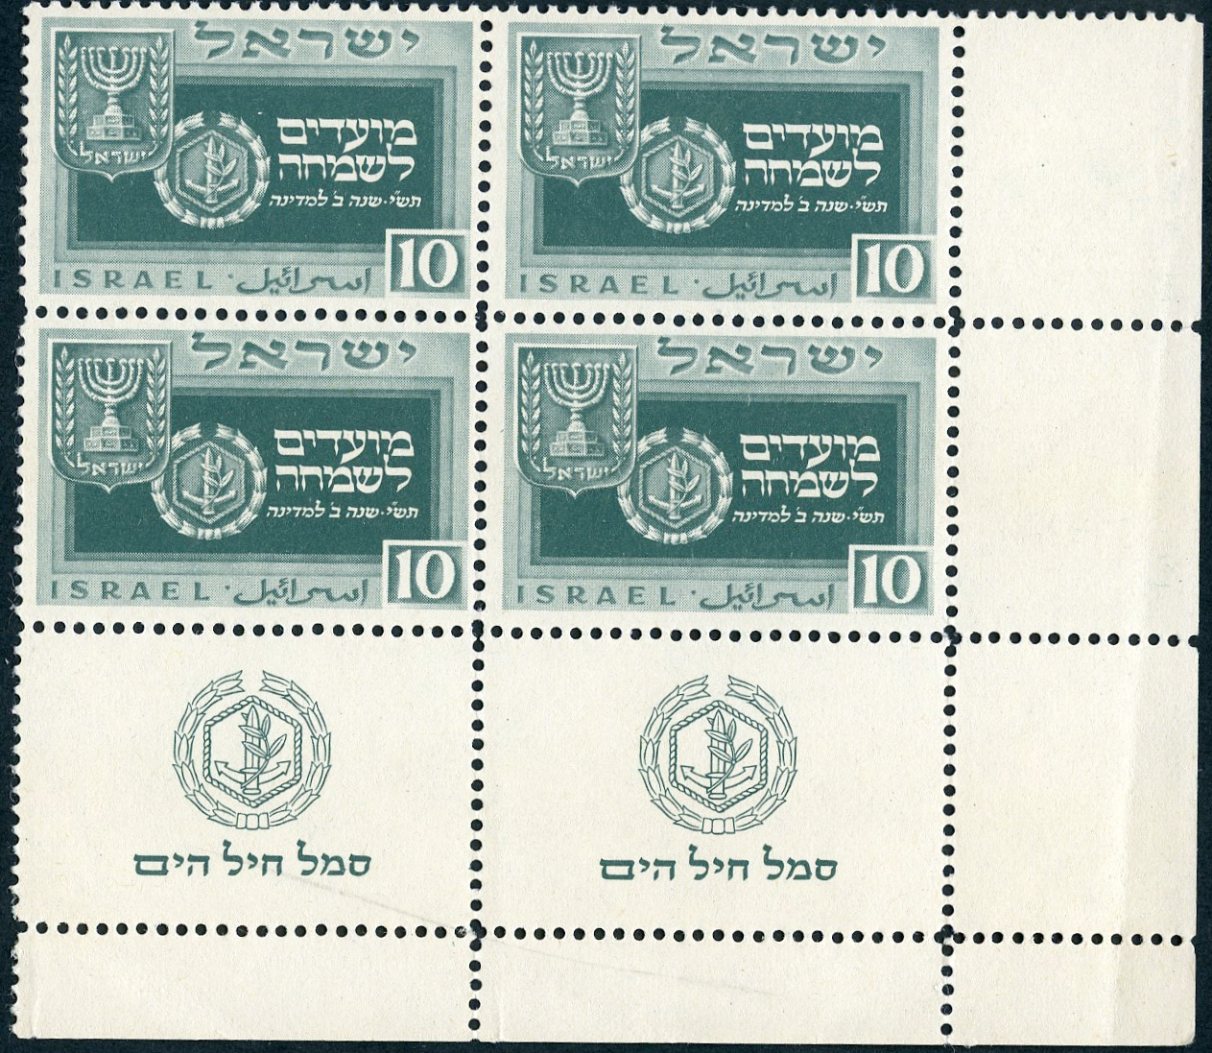 Lot 311 - ISRAEL: ISSUES, FDC's, PLATE BLOCKS & BOOKLETS  -  Tel Aviv Stamps Ltd. Auction #50